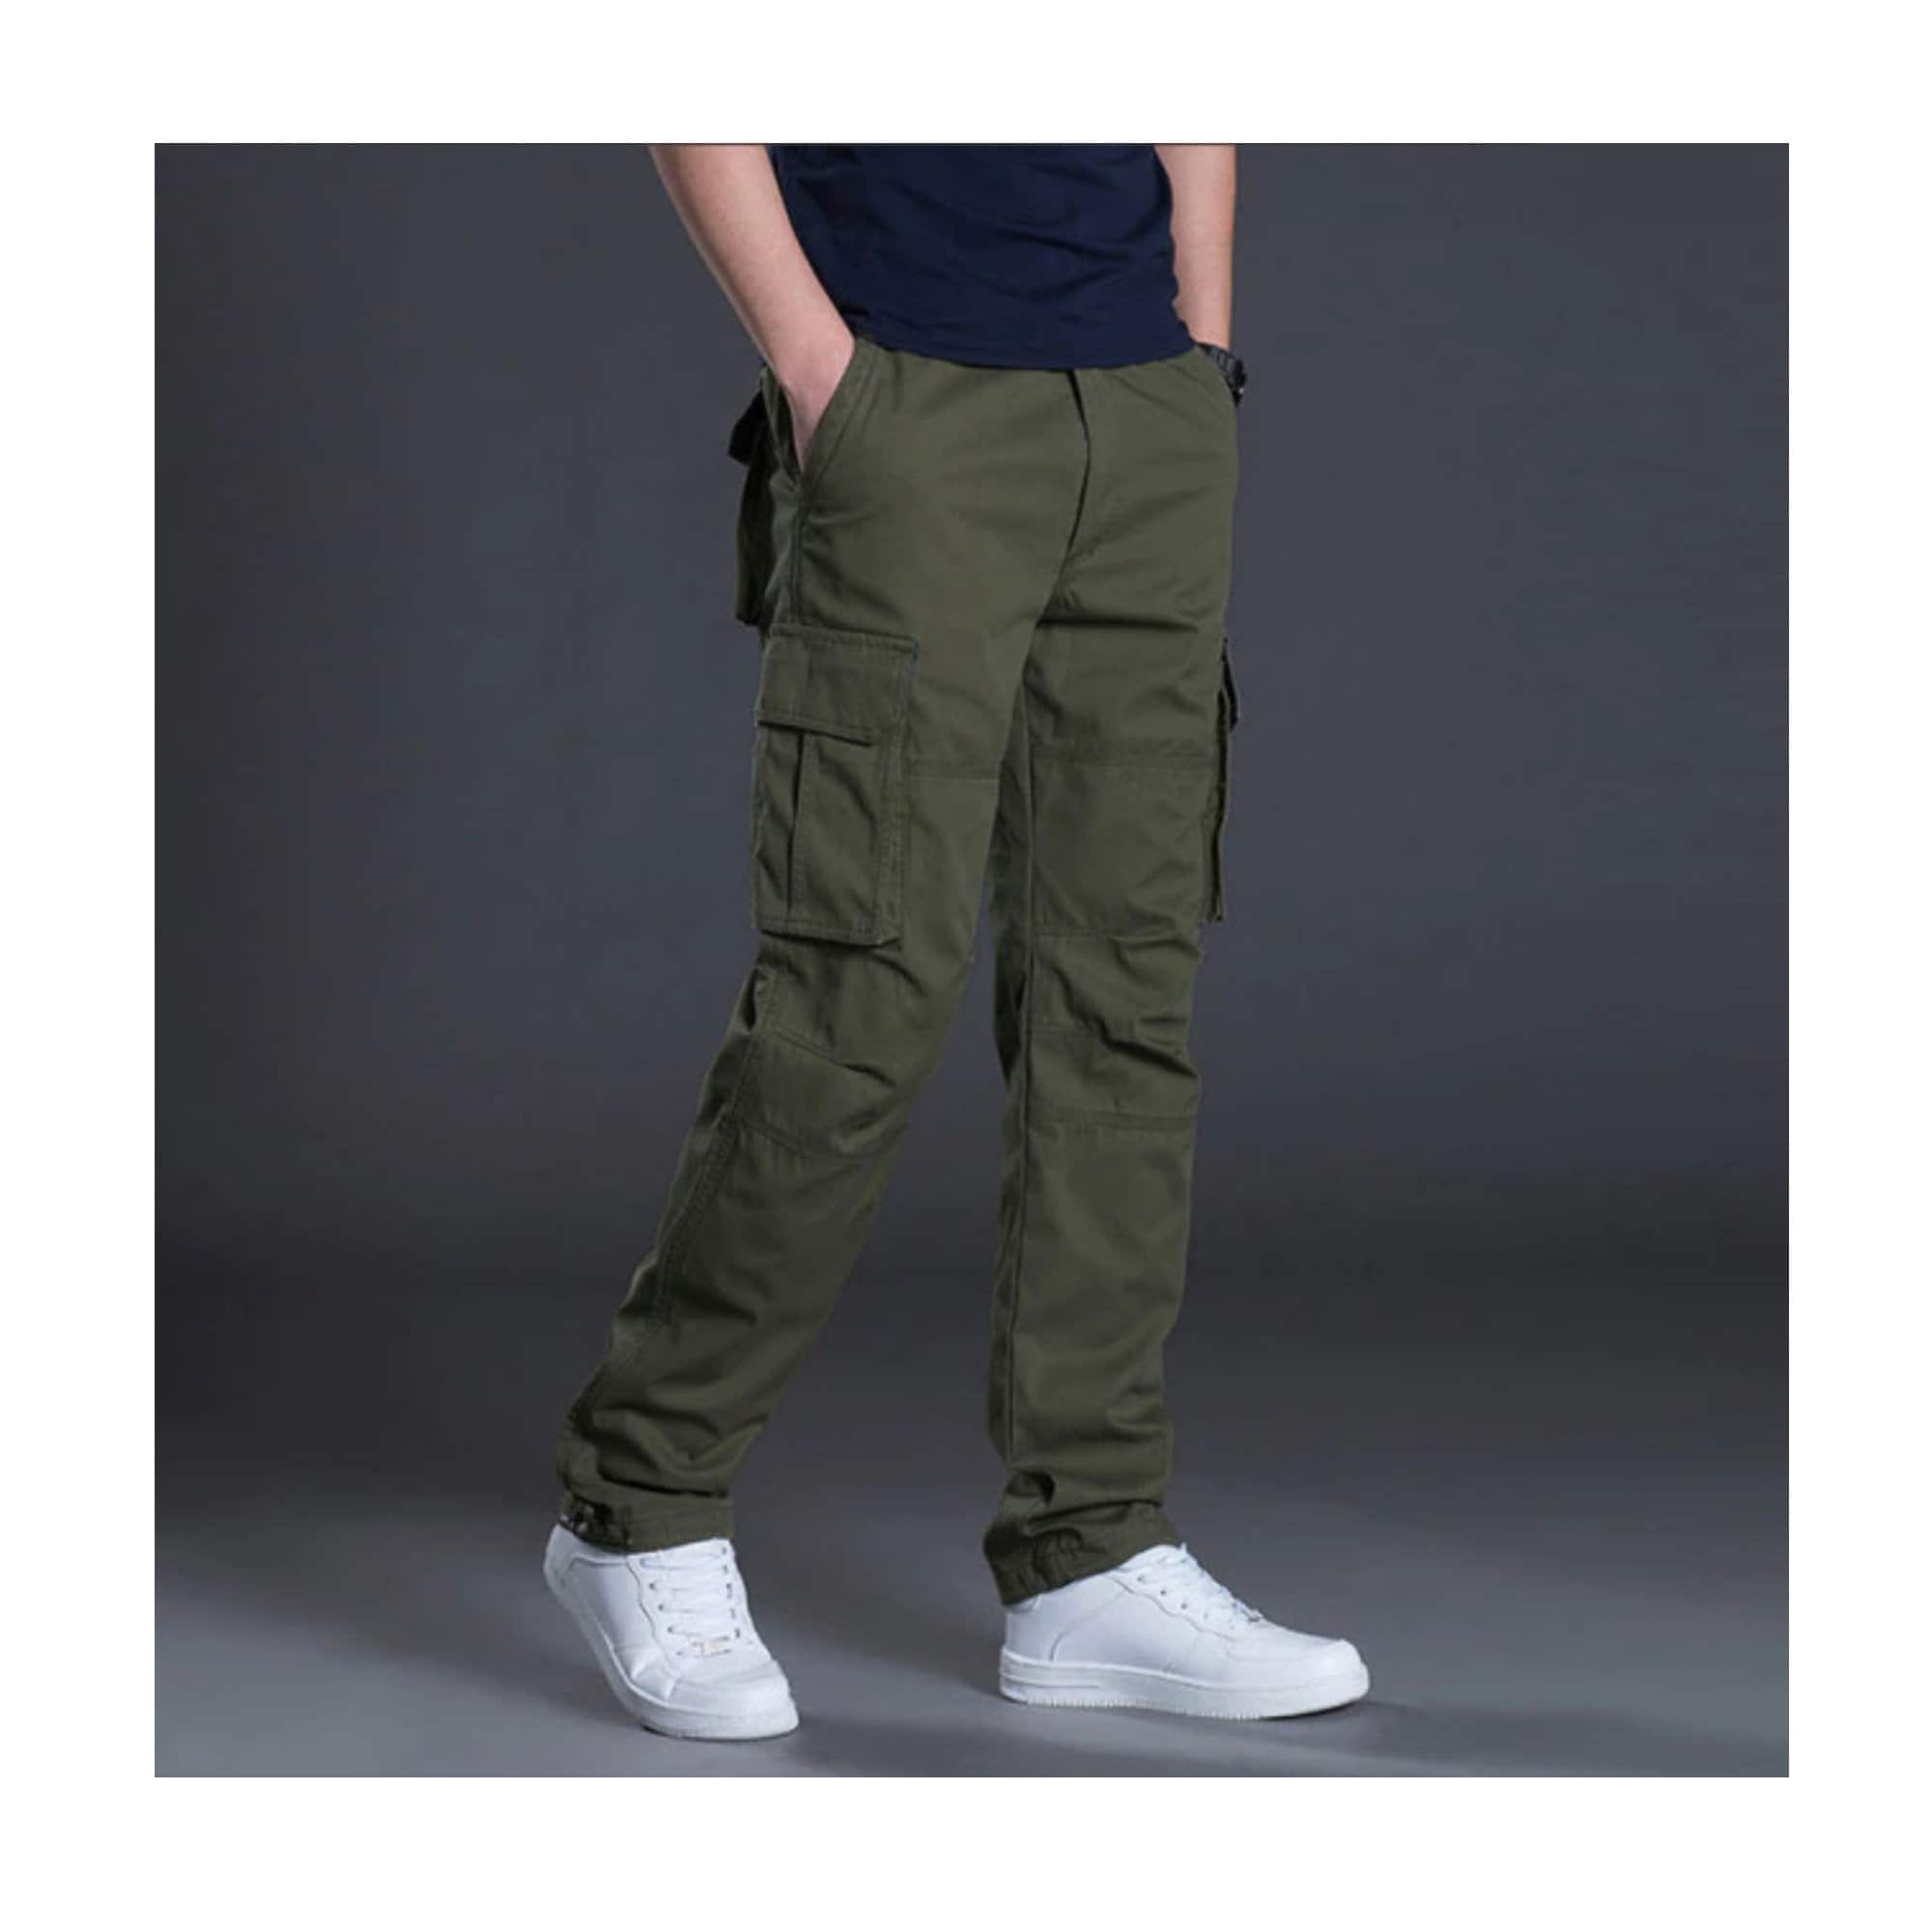 MILITARY SURPLUS Jungle Green Trousers- Men's - MILITARY SURPLUS USED :  Browse our Wide Range of Heavy-Duty Military Surplus Pants for Sale